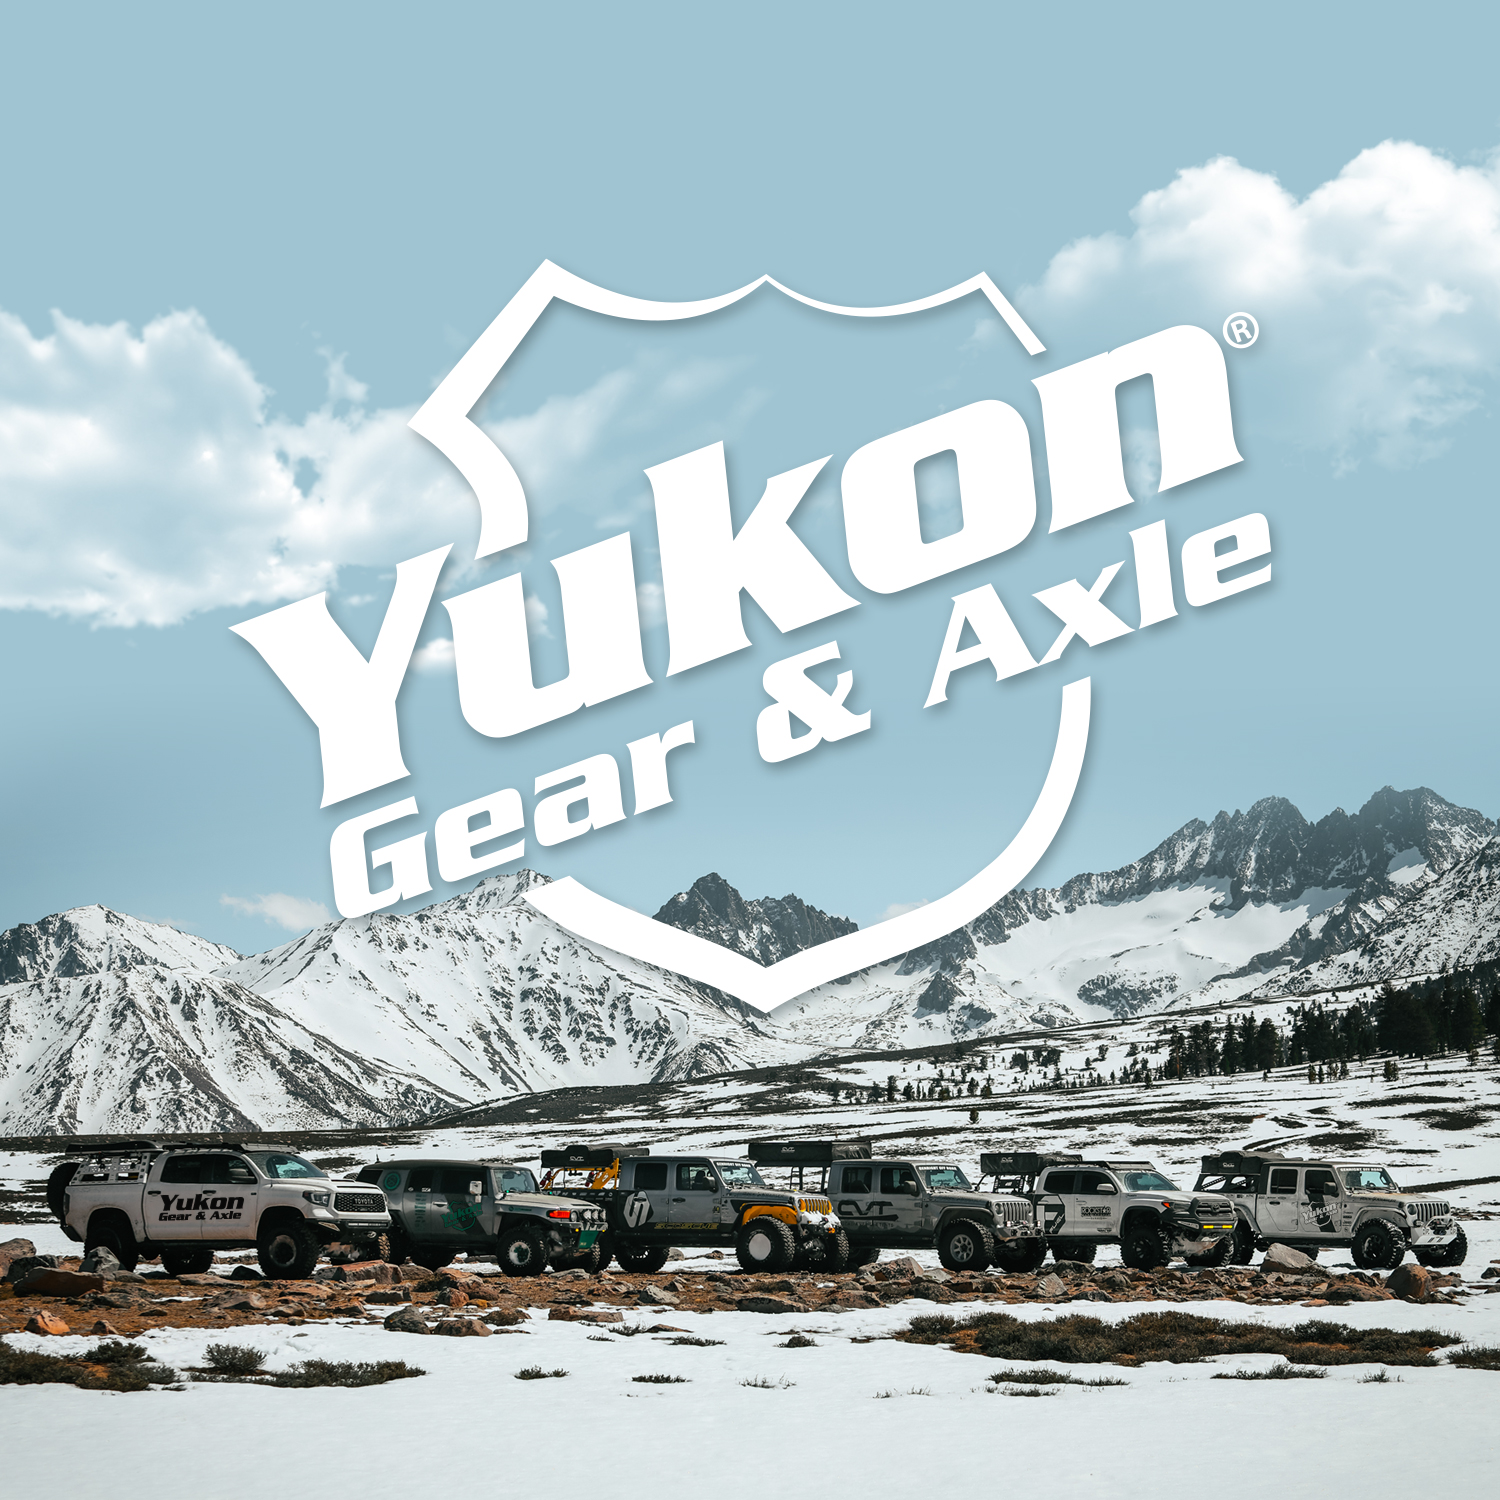 High performance Yukon Ring & Pinion gear set for Toyota in a ratio 